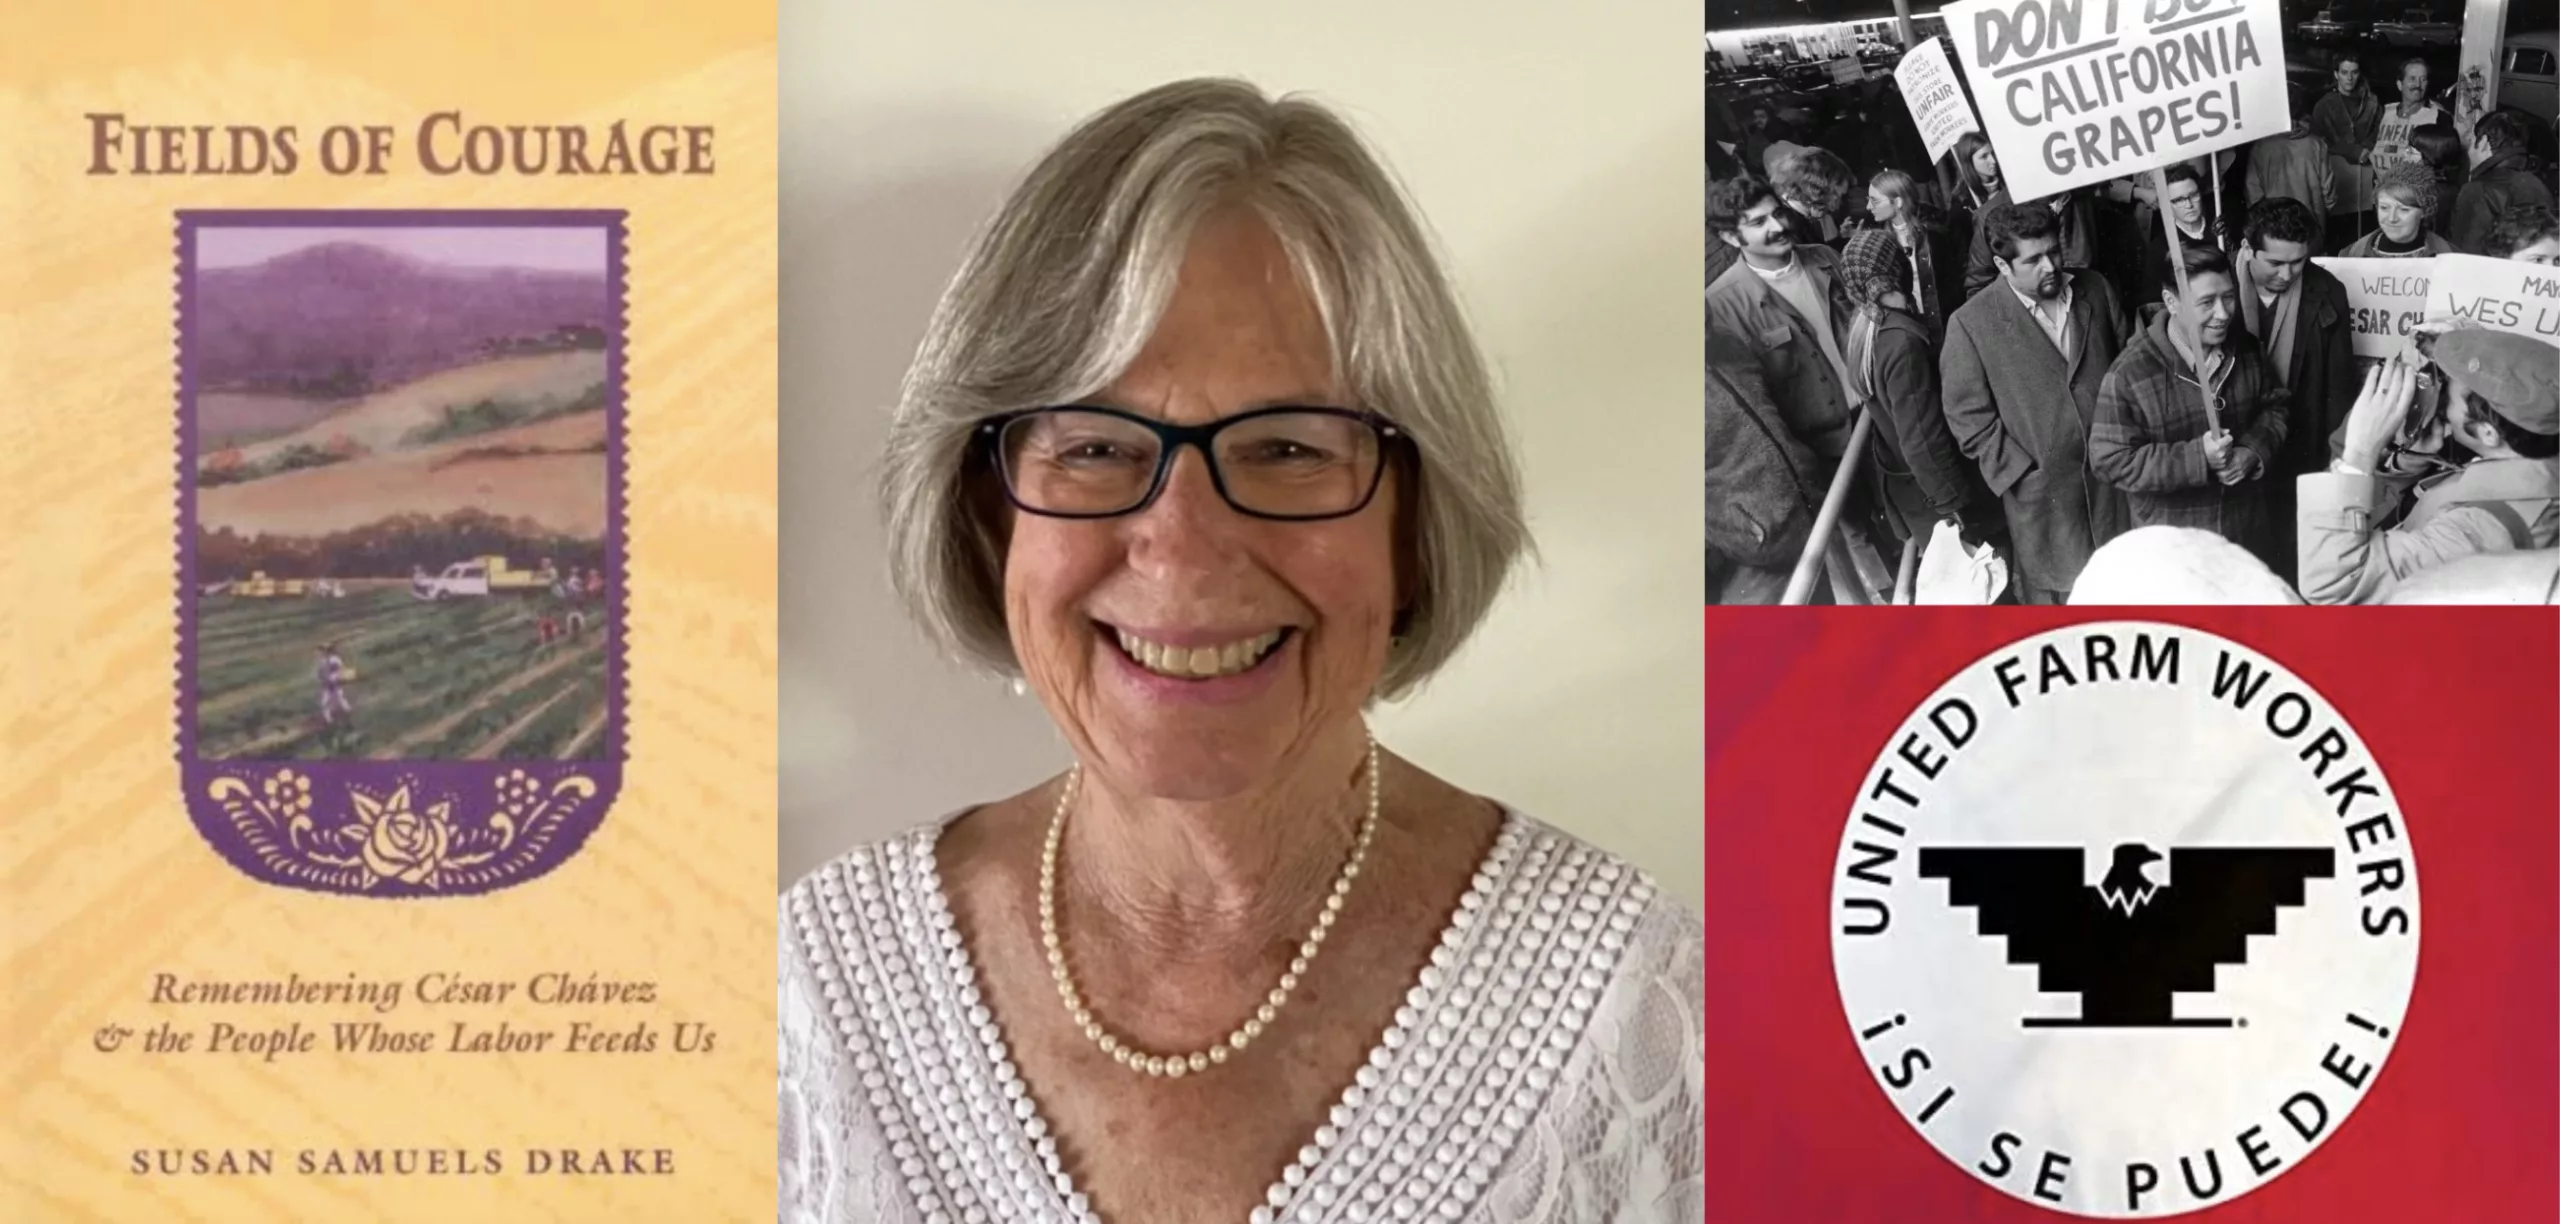 Author and Poet Susan Samuels Drake ‘56 Reflects on her Work with César Chávez